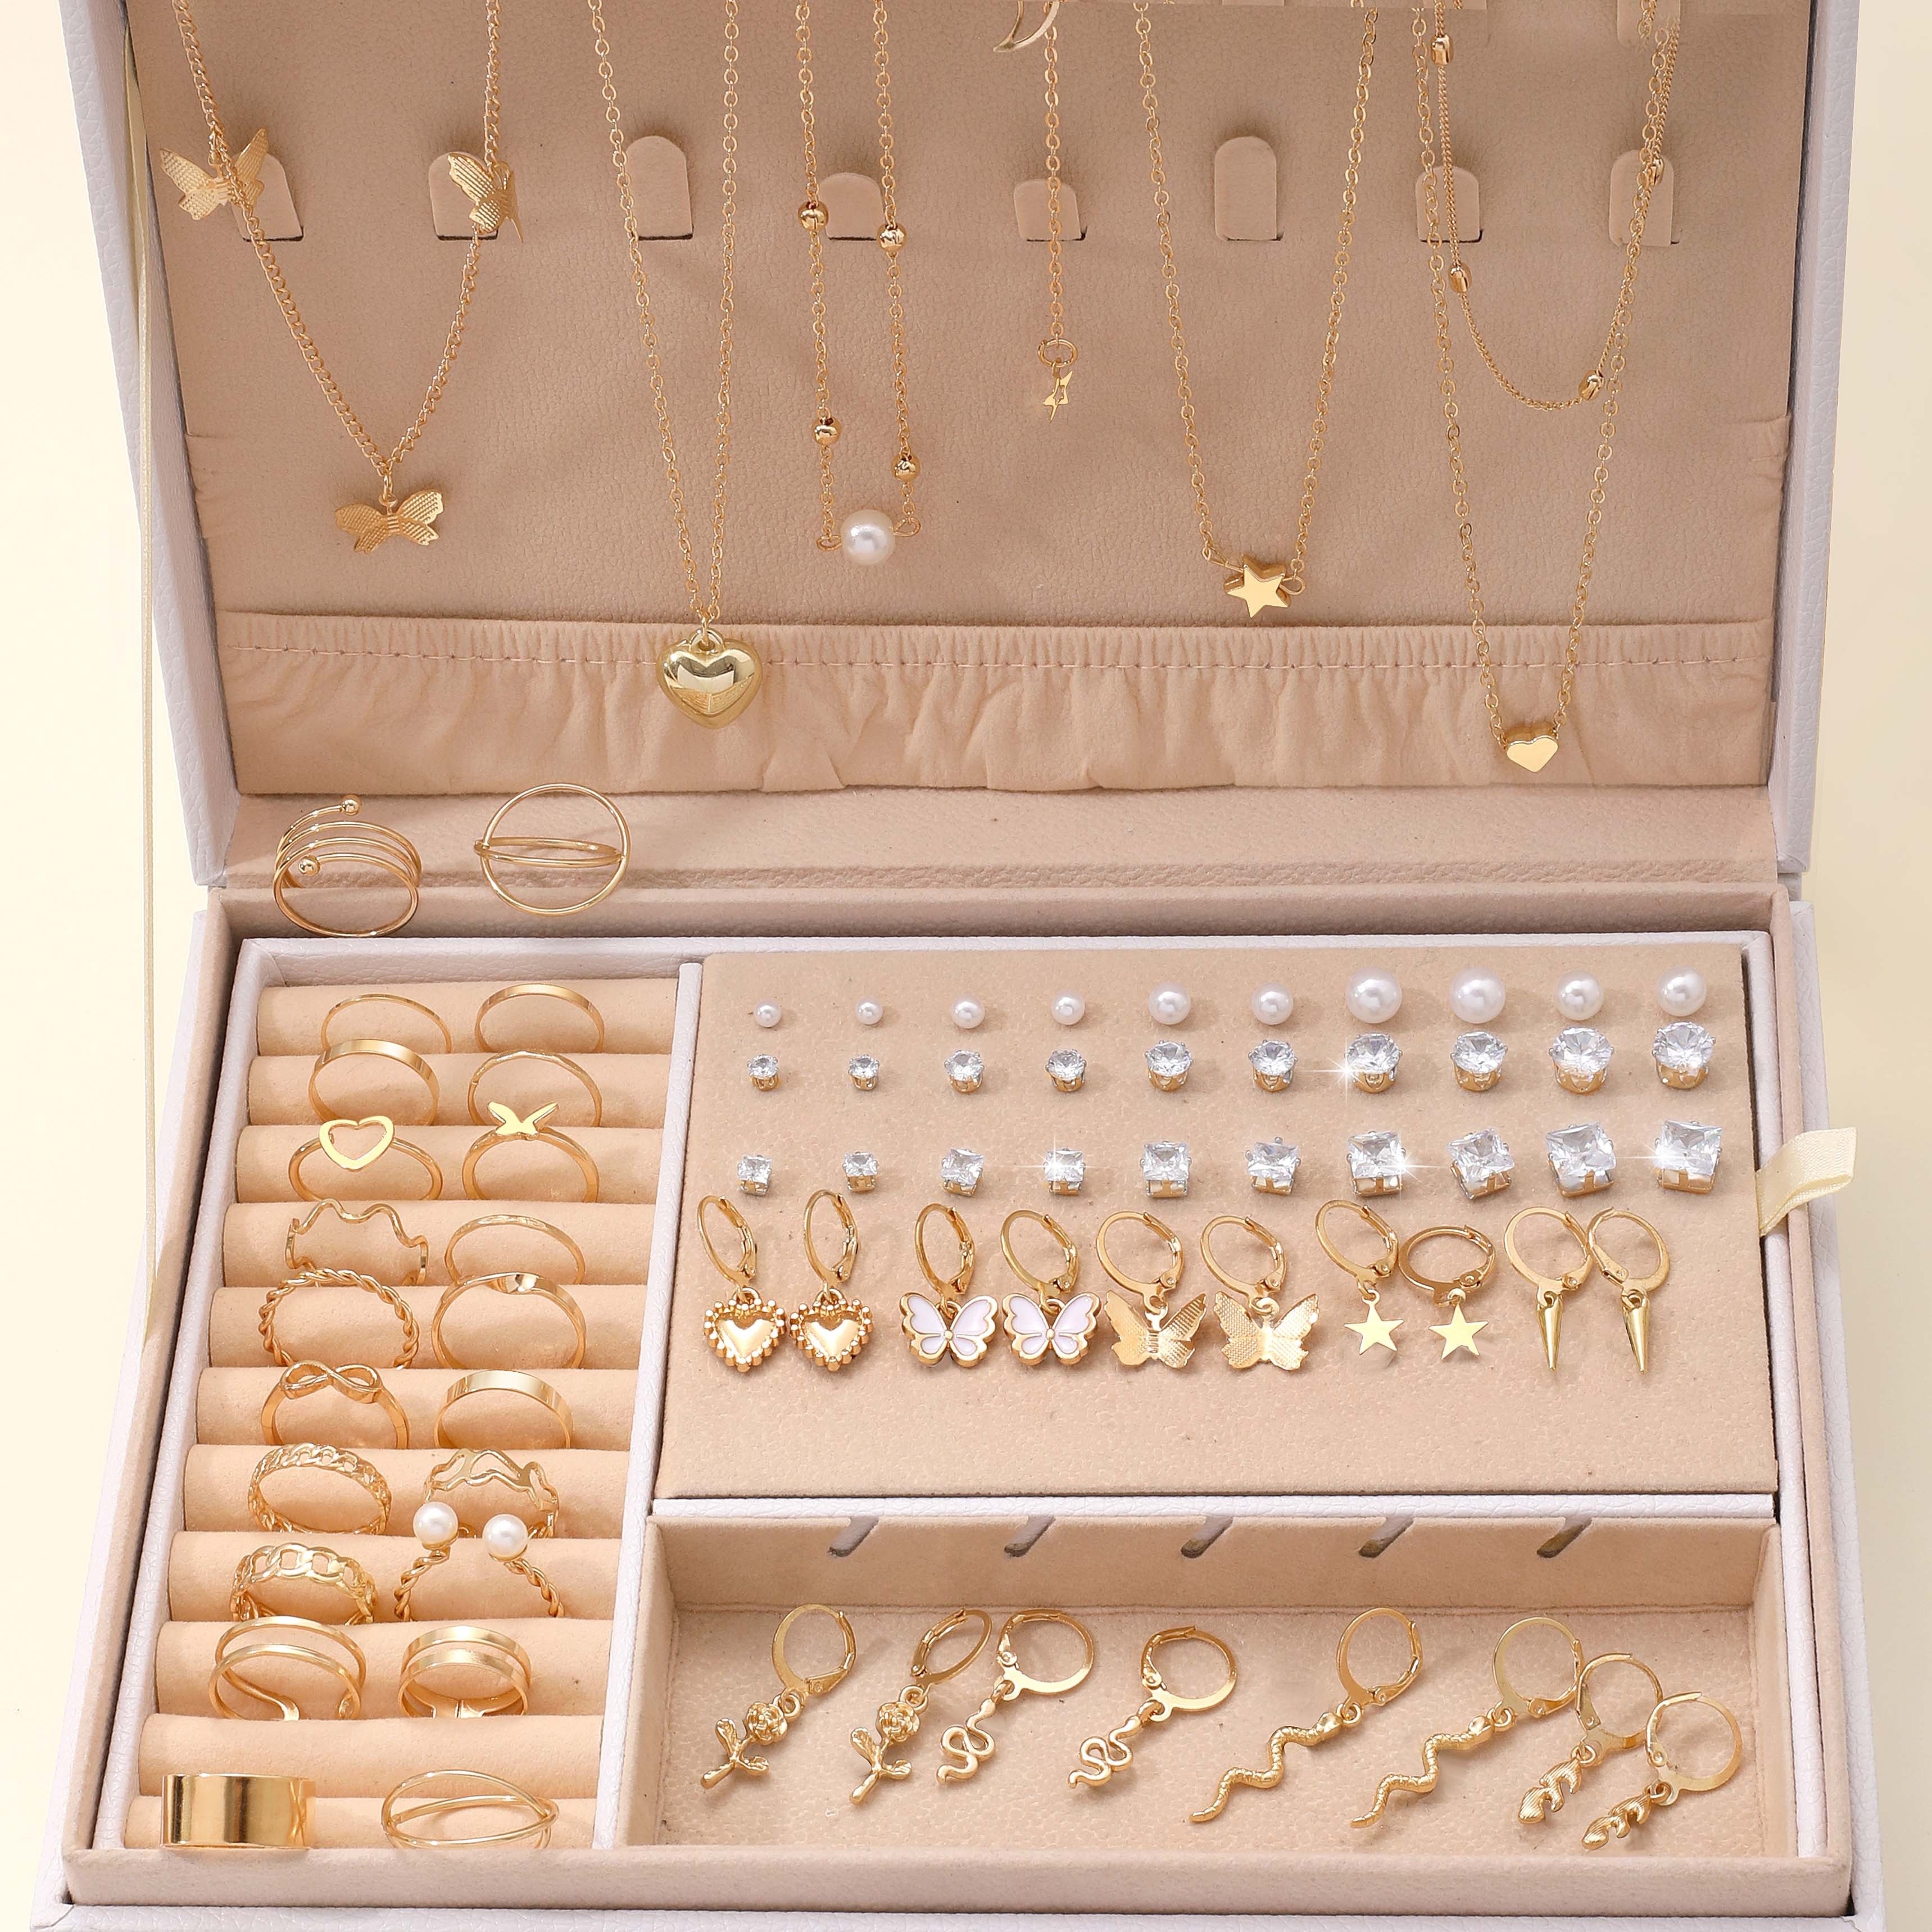 

Elegant 76-piece Faux Jewelry Set For Women, Butterfly & Heart Necklaces, Zirconia Earrings, Hollow Rings, Fashion Accessories For Daily Wear, Commute, Dates, Vintage & Sexy Styles (box Not Included)